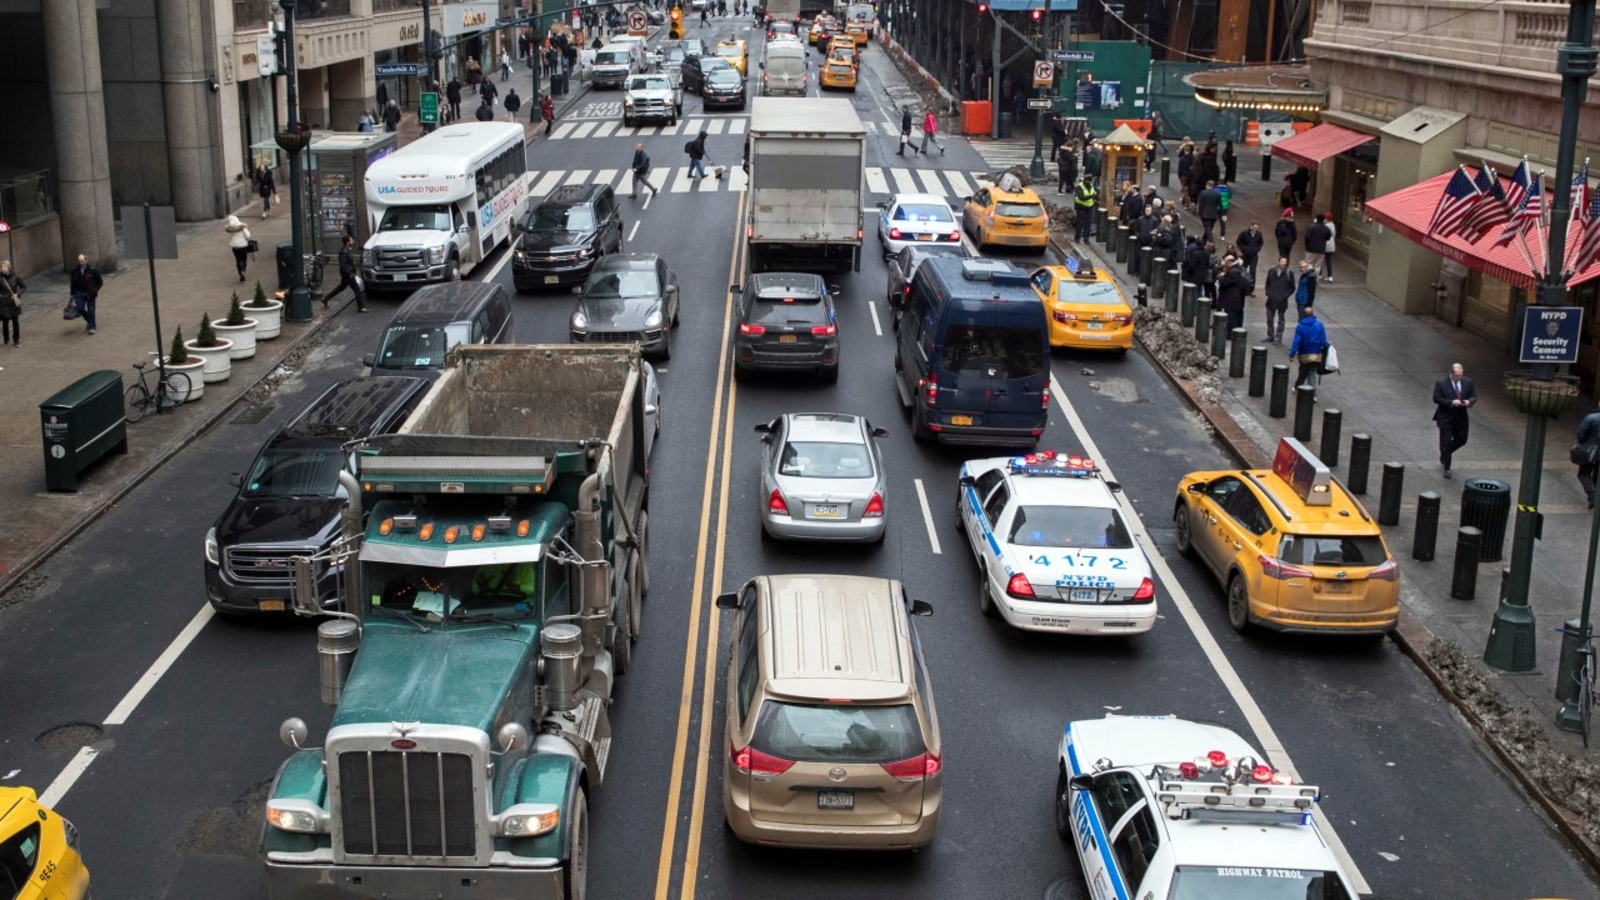 MTA board advances congestion pricing plan to next step for public comment period